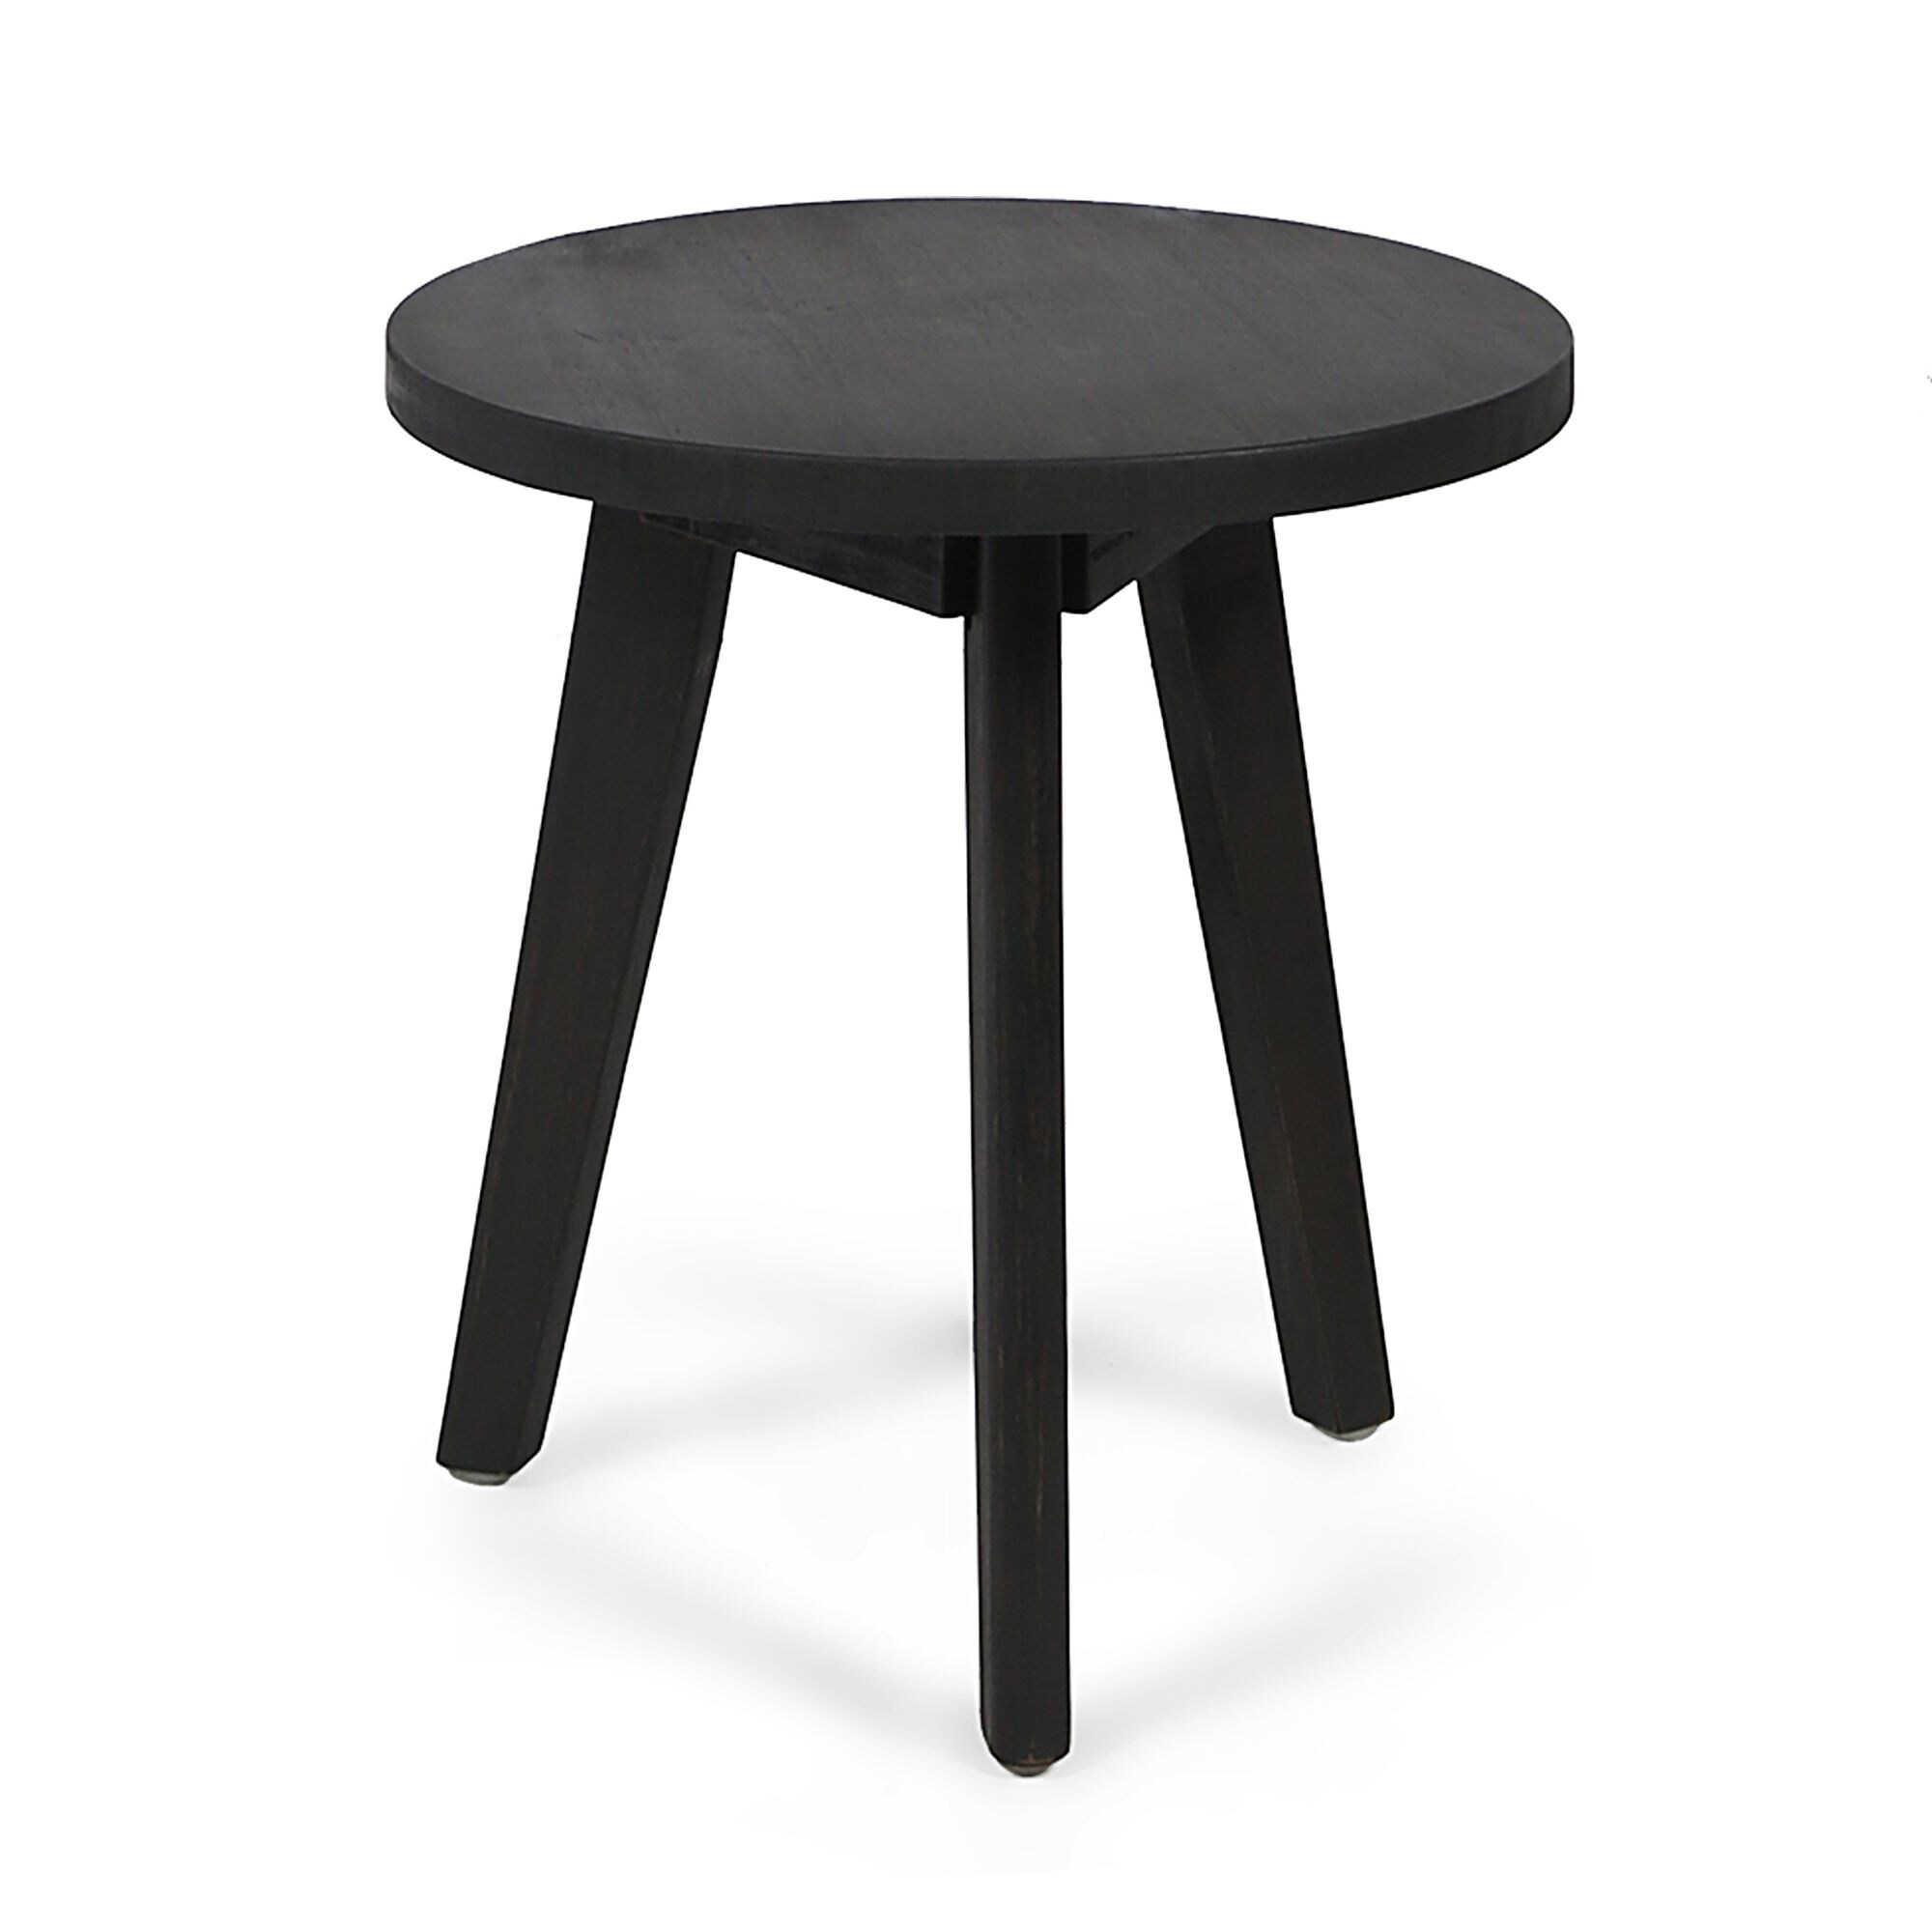 16" Charcoal Gray Contemporary Round Top Outdoor Patio Side Table